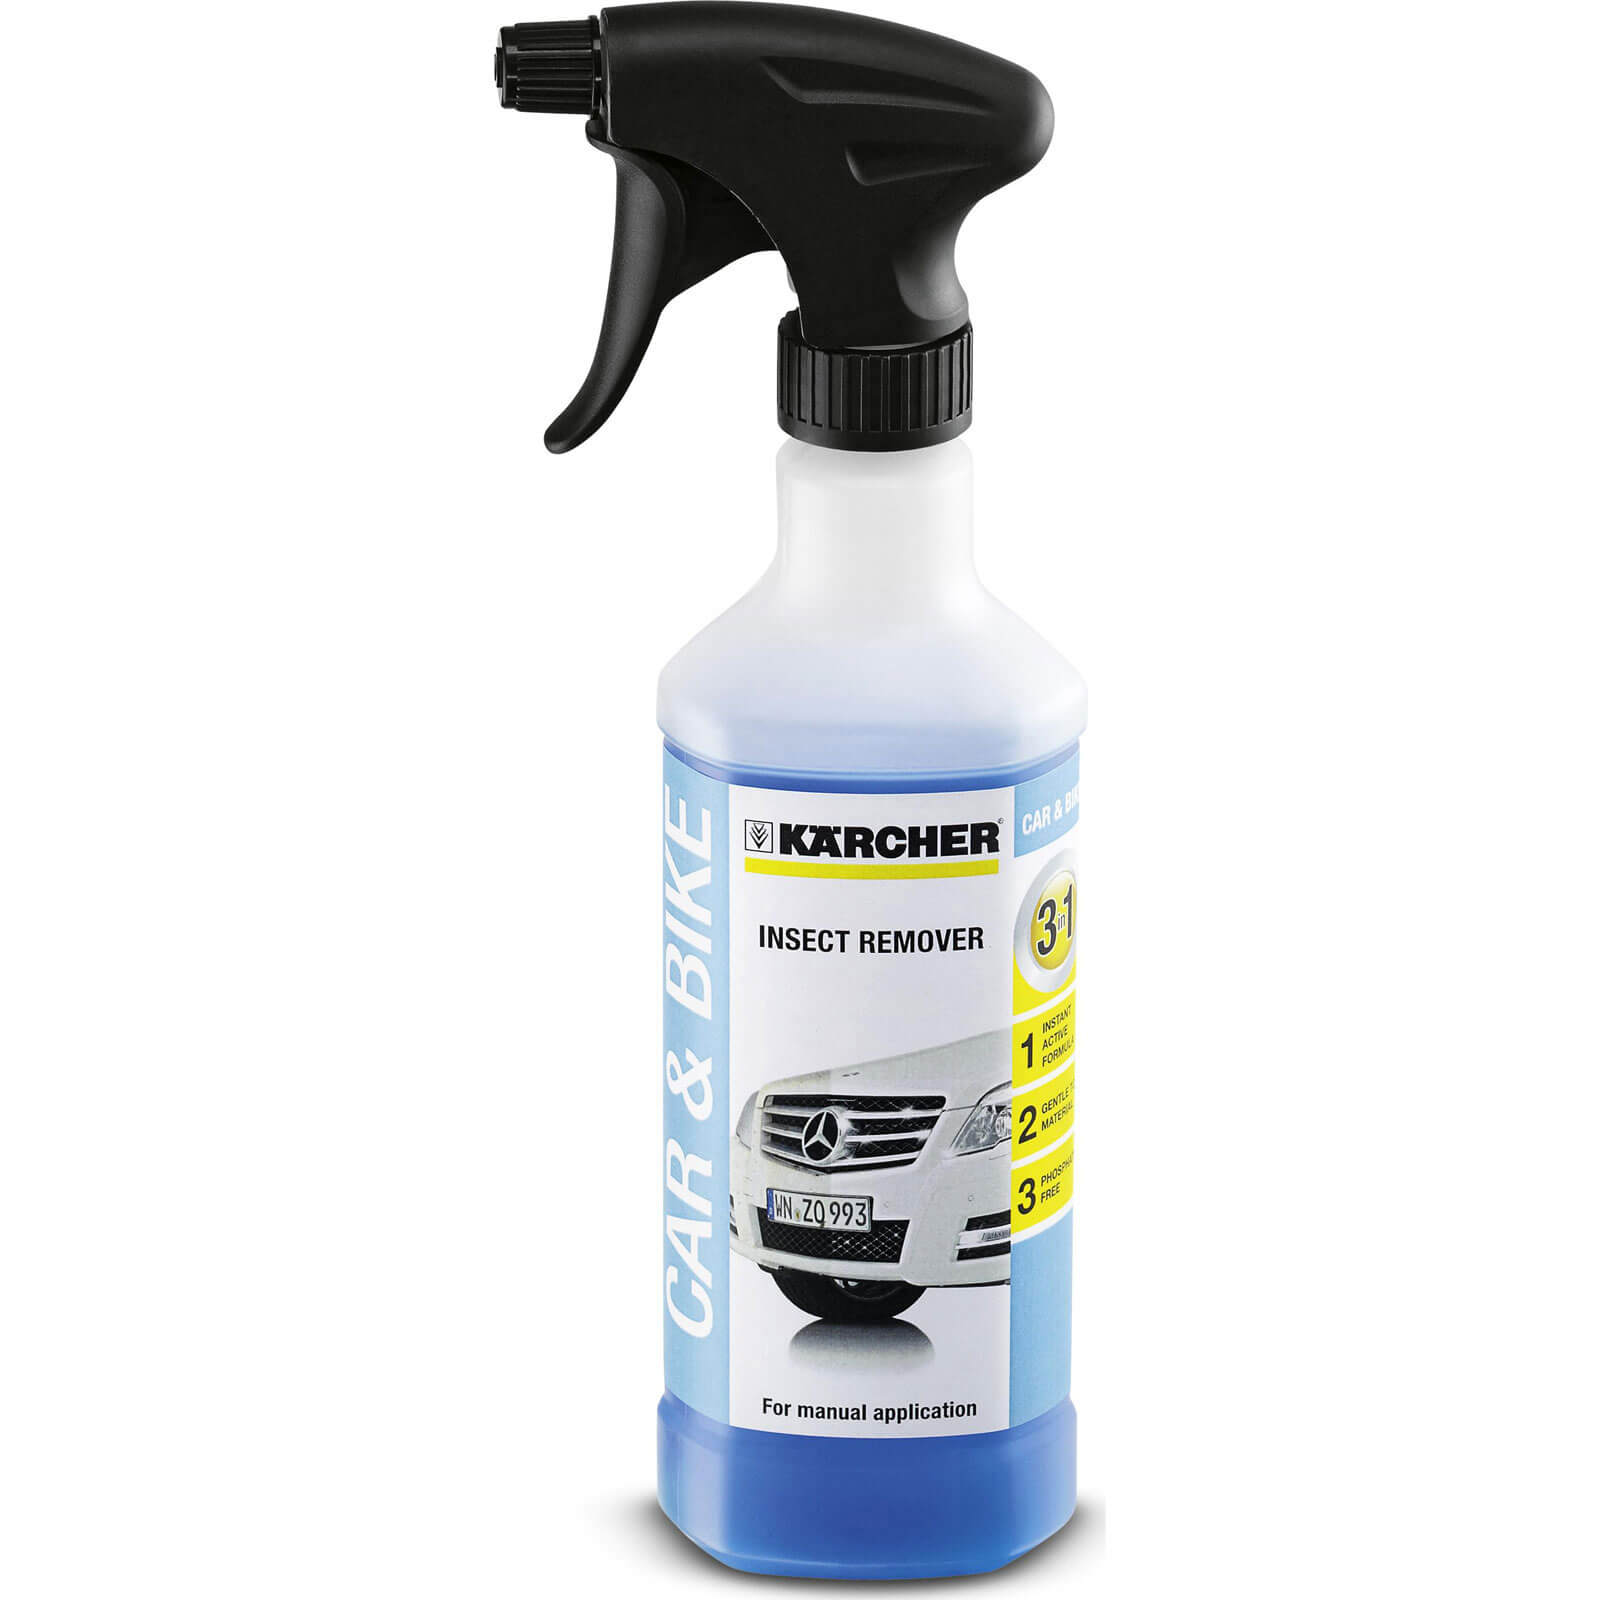 Image of Karcher Insect Remover for Pressure Washers 500ml